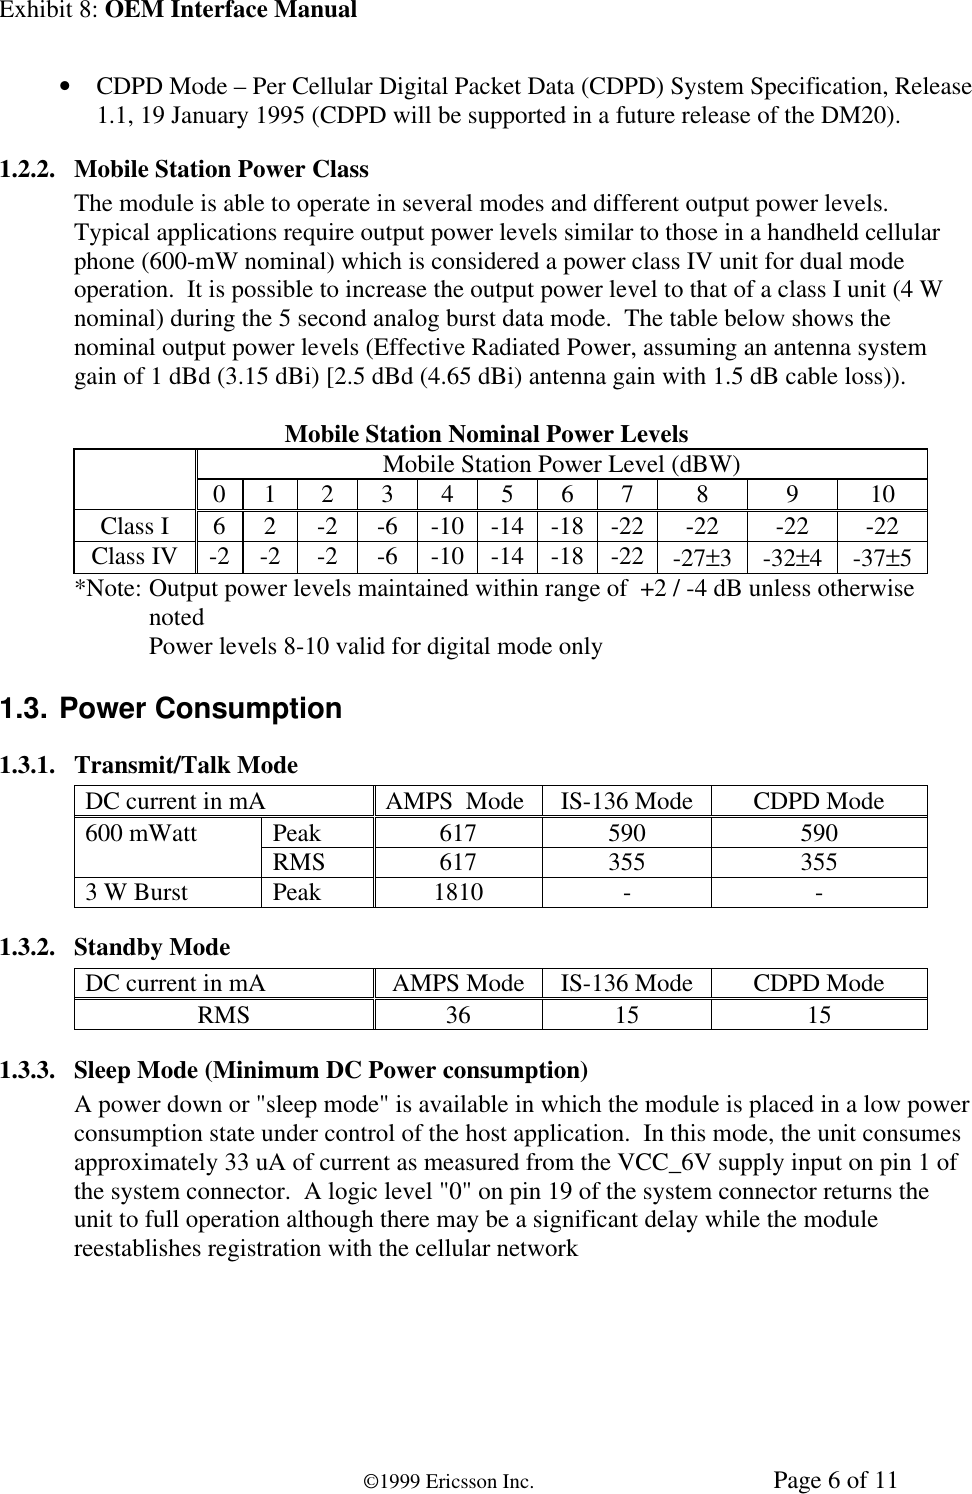 Exhibit 8: OEM Interface Manual©1999 Ericsson Inc. Page 6 of 11• CDPD Mode – Per Cellular Digital Packet Data (CDPD) System Specification, Release1.1, 19 January 1995 (CDPD will be supported in a future release of the DM20).1.2.2. Mobile Station Power ClassThe module is able to operate in several modes and different output power levels.Typical applications require output power levels similar to those in a handheld cellularphone (600-mW nominal) which is considered a power class IV unit for dual modeoperation.  It is possible to increase the output power level to that of a class I unit (4 Wnominal) during the 5 second analog burst data mode.  The table below shows thenominal output power levels (Effective Radiated Power, assuming an antenna systemgain of 1 dBd (3.15 dBi) [2.5 dBd (4.65 dBi) antenna gain with 1.5 dB cable loss)).Mobile Station Nominal Power LevelsMobile Station Power Level (dBW)0 1 2 3 4 5 6 7 8 9 10Class I 6 2 -2 -6 -10 -14 -18 -22 -22 -22 -22Class IV -2 -2 -2 -6 -10 -14 -18 -22 -27±3-32±4-37±5*Note: Output power levels maintained within range of  +2 / -4 dB unless otherwisenotedPower levels 8-10 valid for digital mode only1.3. Power Consumption1.3.1. Transmit/Talk ModeDC current in mA AMPS  Mode IS-136 Mode CDPD ModePeak 617 590 590600 mWatt RMS 617 355 3553 W Burst Peak 1810 - -1.3.2. Standby ModeDC current in mA AMPS Mode IS-136 Mode CDPD ModeRMS 36 15 151.3.3. Sleep Mode (Minimum DC Power consumption)A power down or &quot;sleep mode&quot; is available in which the module is placed in a low powerconsumption state under control of the host application.  In this mode, the unit consumesapproximately 33 uA of current as measured from the VCC_6V supply input on pin 1 ofthe system connector.  A logic level &quot;0&quot; on pin 19 of the system connector returns theunit to full operation although there may be a significant delay while the modulereestablishes registration with the cellular network